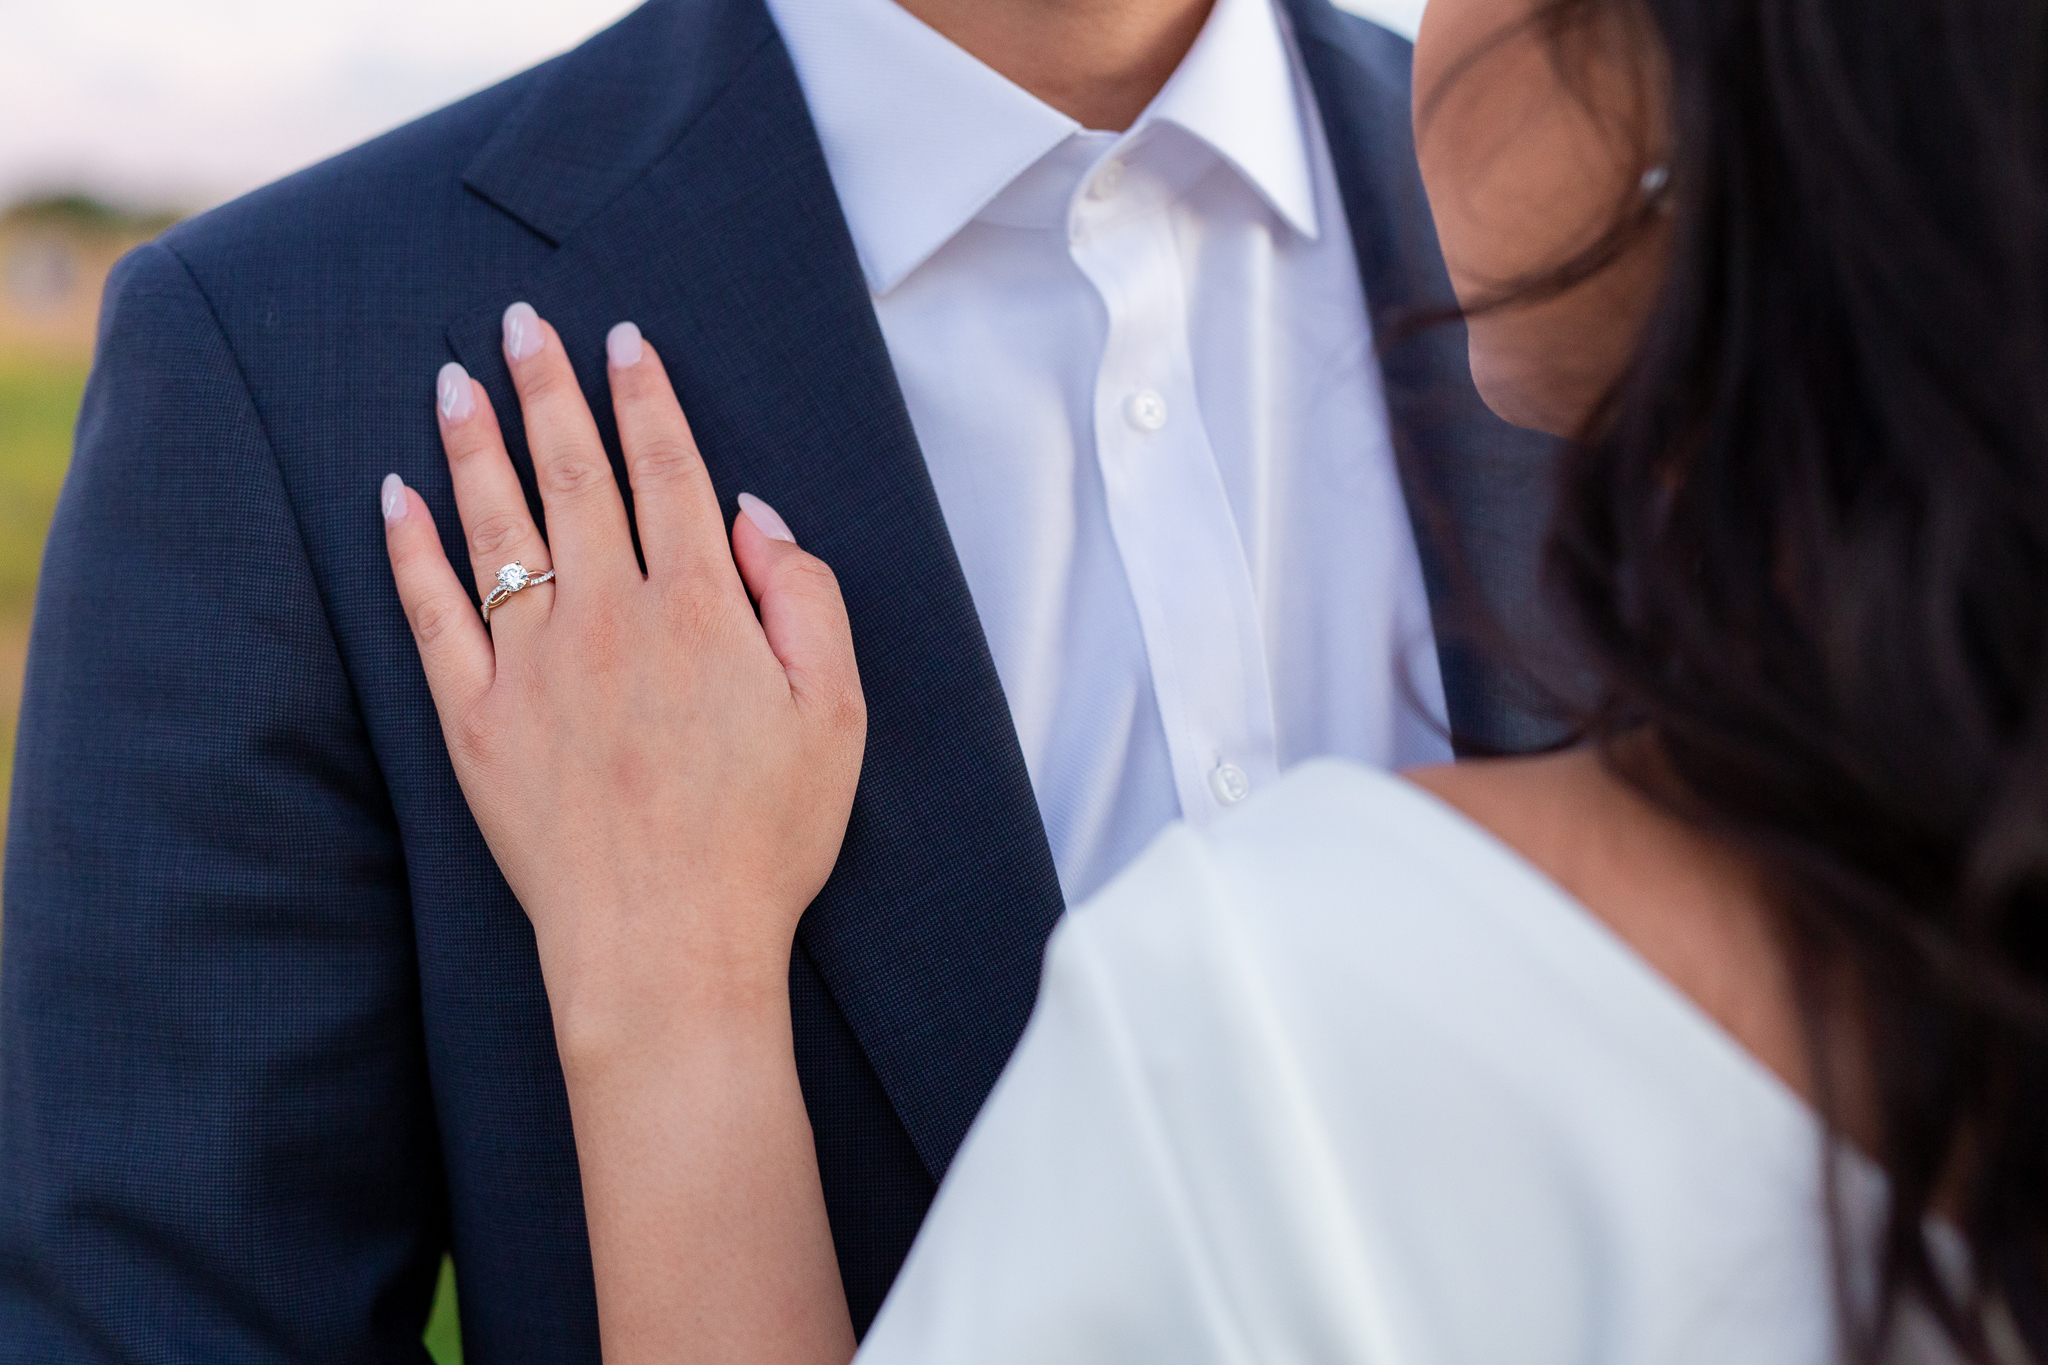 Dallas wedding photographer captures detail shot of engagement ring as the woman holds her hand over the grooms suit coat